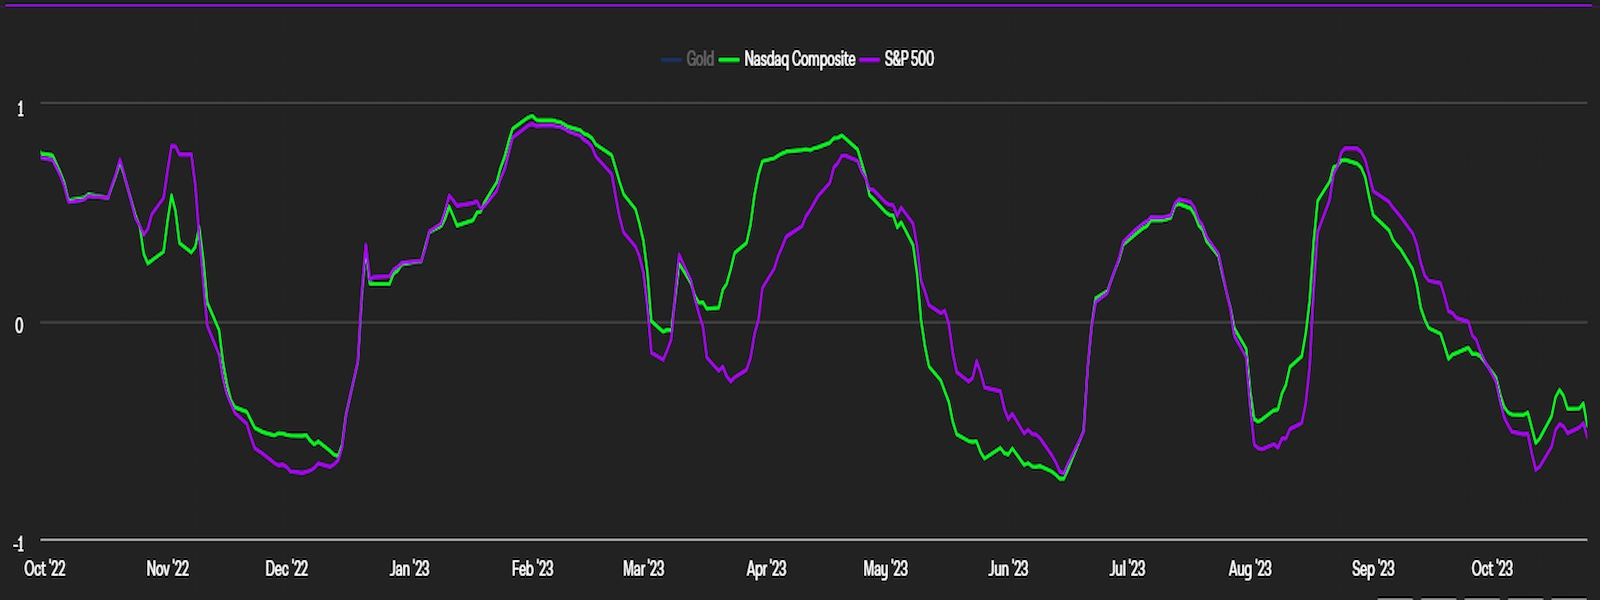 BTC price 30-day correlation with the Nasdaq Composite and the S&P 500. 